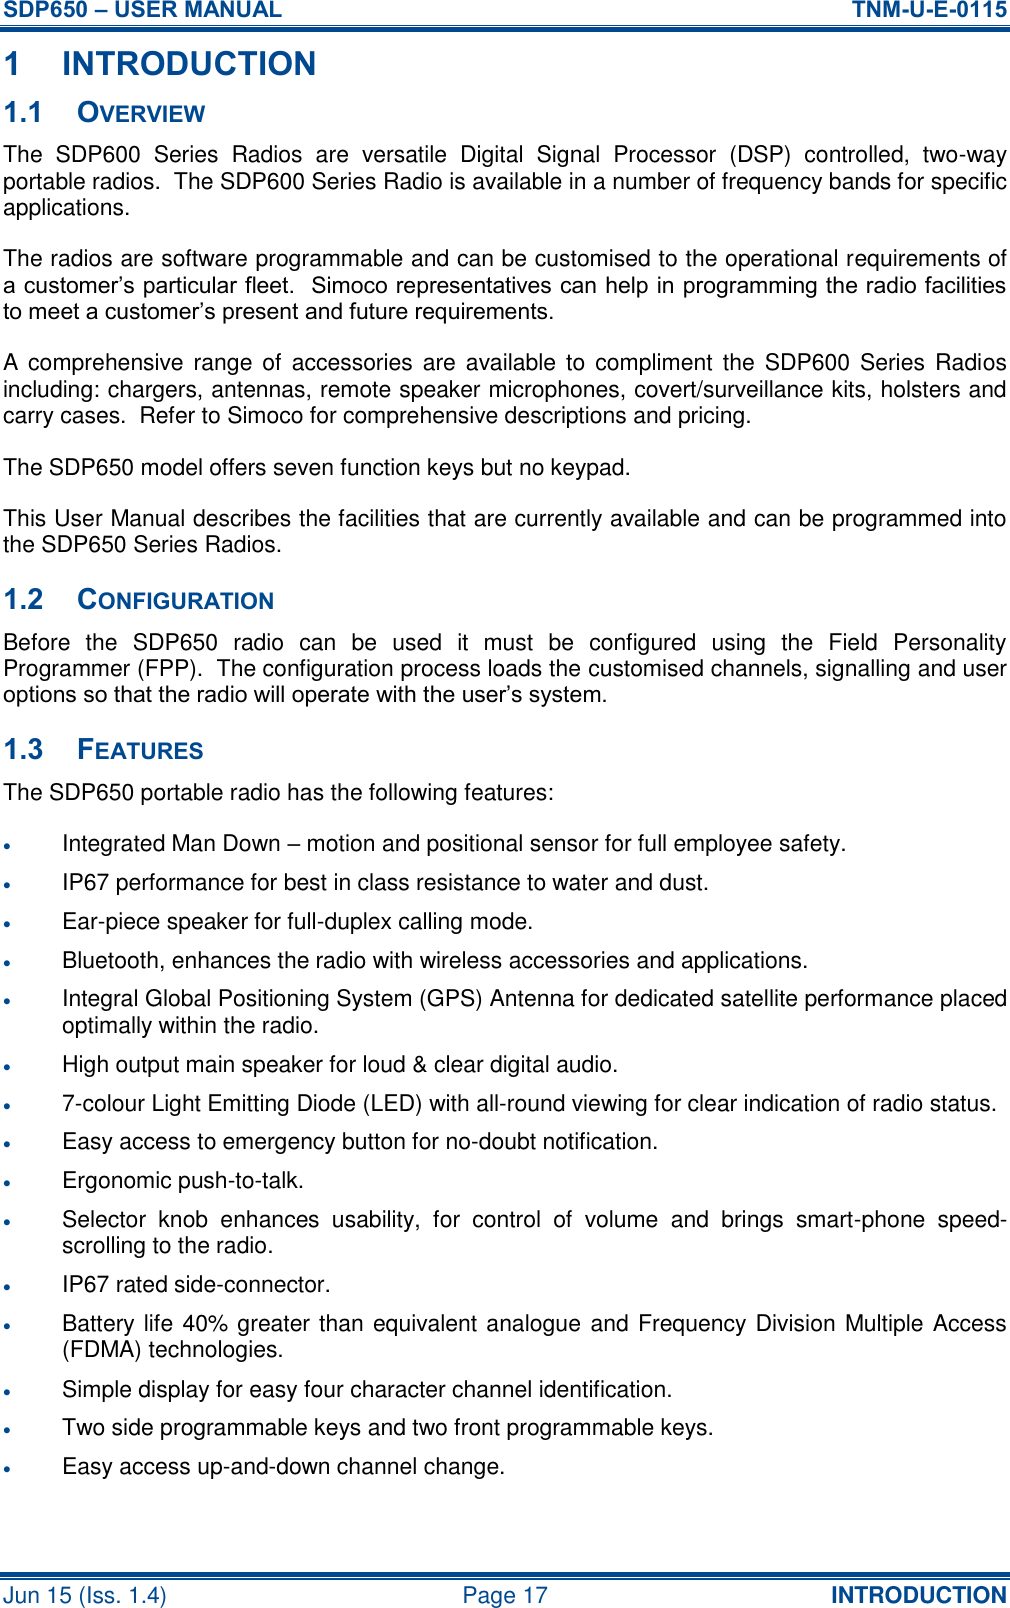 SDP650 – USER MANUAL  TNM-U-E-0115 Jun 15 (Iss. 1.4)  Page 17 INTRODUCTION 1 INTRODUCTION 1.1 OVERVIEW The  SDP600  Series  Radios  are  versatile  Digital  Signal  Processor  (DSP)  controlled,  two-way portable radios.  The SDP600 Series Radio is available in a number of frequency bands for specific applications. The radios are software programmable and can be customised to the operational requirements of a customer’s particular fleet.  Simoco representatives can help in programming the radio facilities to meet a customer’s present and future requirements. A comprehensive range  of accessories are  available to  compliment  the  SDP600 Series  Radios including: chargers, antennas, remote speaker microphones, covert/surveillance kits, holsters and carry cases.  Refer to Simoco for comprehensive descriptions and pricing. The SDP650 model offers seven function keys but no keypad. This User Manual describes the facilities that are currently available and can be programmed into the SDP650 Series Radios. 1.2 CONFIGURATION Before  the  SDP650  radio  can  be  used  it  must  be  configured  using  the  Field  Personality Programmer (FPP).  The configuration process loads the customised channels, signalling and user options so that the radio will operate with the user’s system. 1.3 FEATURES The SDP650 portable radio has the following features:  Integrated Man Down – motion and positional sensor for full employee safety.  IP67 performance for best in class resistance to water and dust.  Ear-piece speaker for full-duplex calling mode.  Bluetooth, enhances the radio with wireless accessories and applications.  Integral Global Positioning System (GPS) Antenna for dedicated satellite performance placed optimally within the radio.  High output main speaker for loud &amp; clear digital audio.  7-colour Light Emitting Diode (LED) with all-round viewing for clear indication of radio status.  Easy access to emergency button for no-doubt notification.  Ergonomic push-to-talk.  Selector  knob  enhances  usability,  for  control  of  volume  and  brings  smart-phone  speed-scrolling to the radio.  IP67 rated side-connector.  Battery life 40% greater than equivalent analogue and Frequency Division Multiple Access (FDMA) technologies.  Simple display for easy four character channel identification.  Two side programmable keys and two front programmable keys.  Easy access up-and-down channel change.  